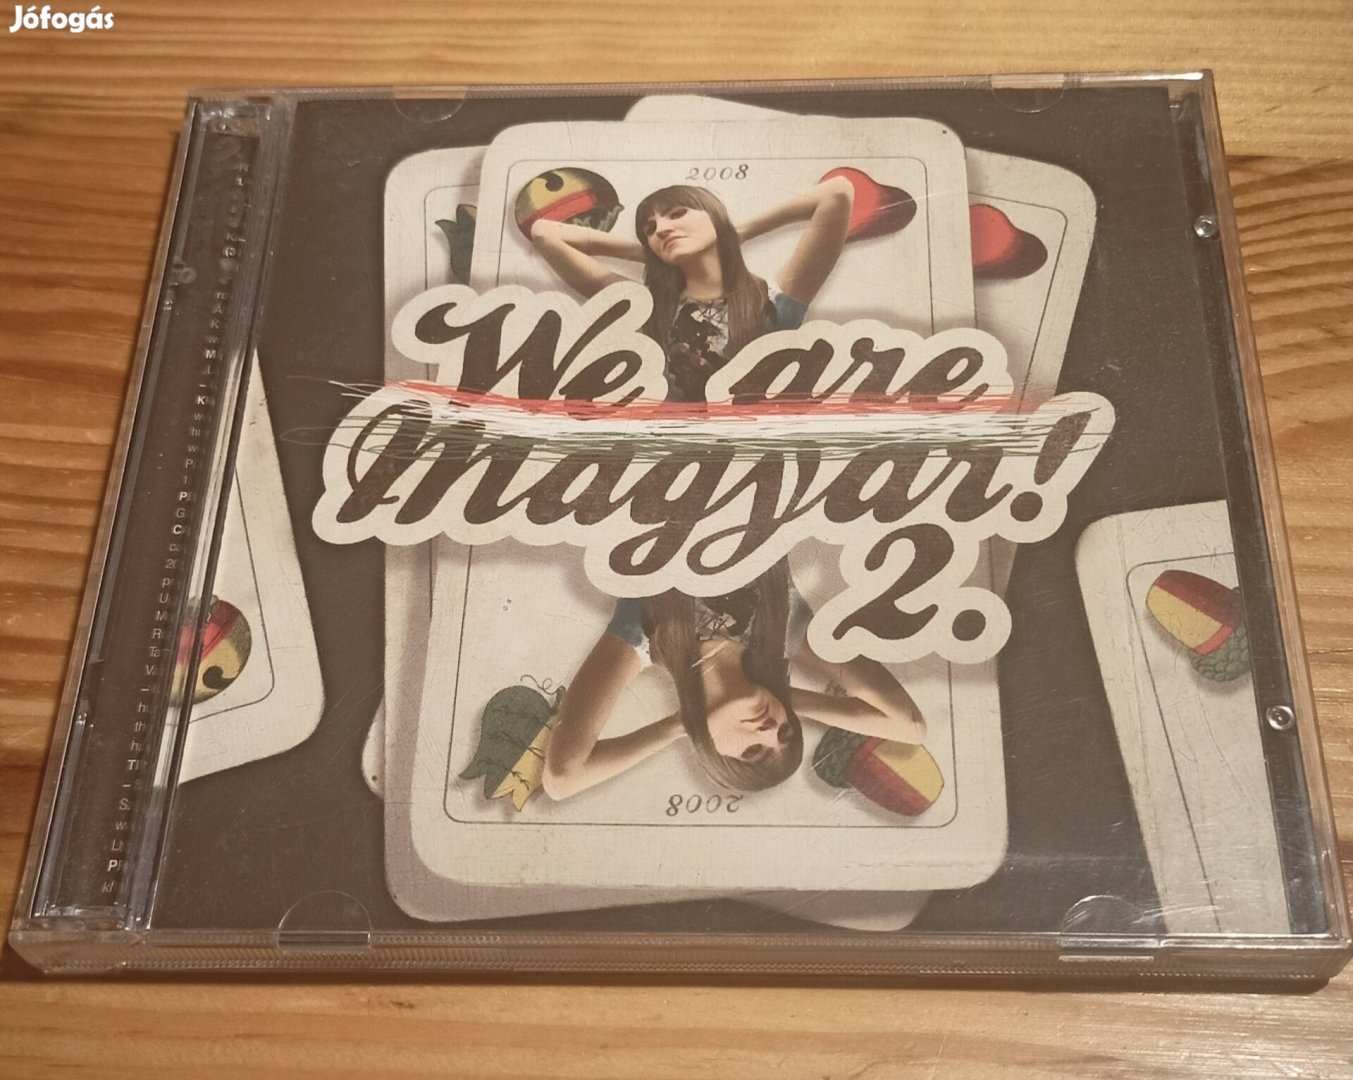 We are Magyar 2. dupla CD